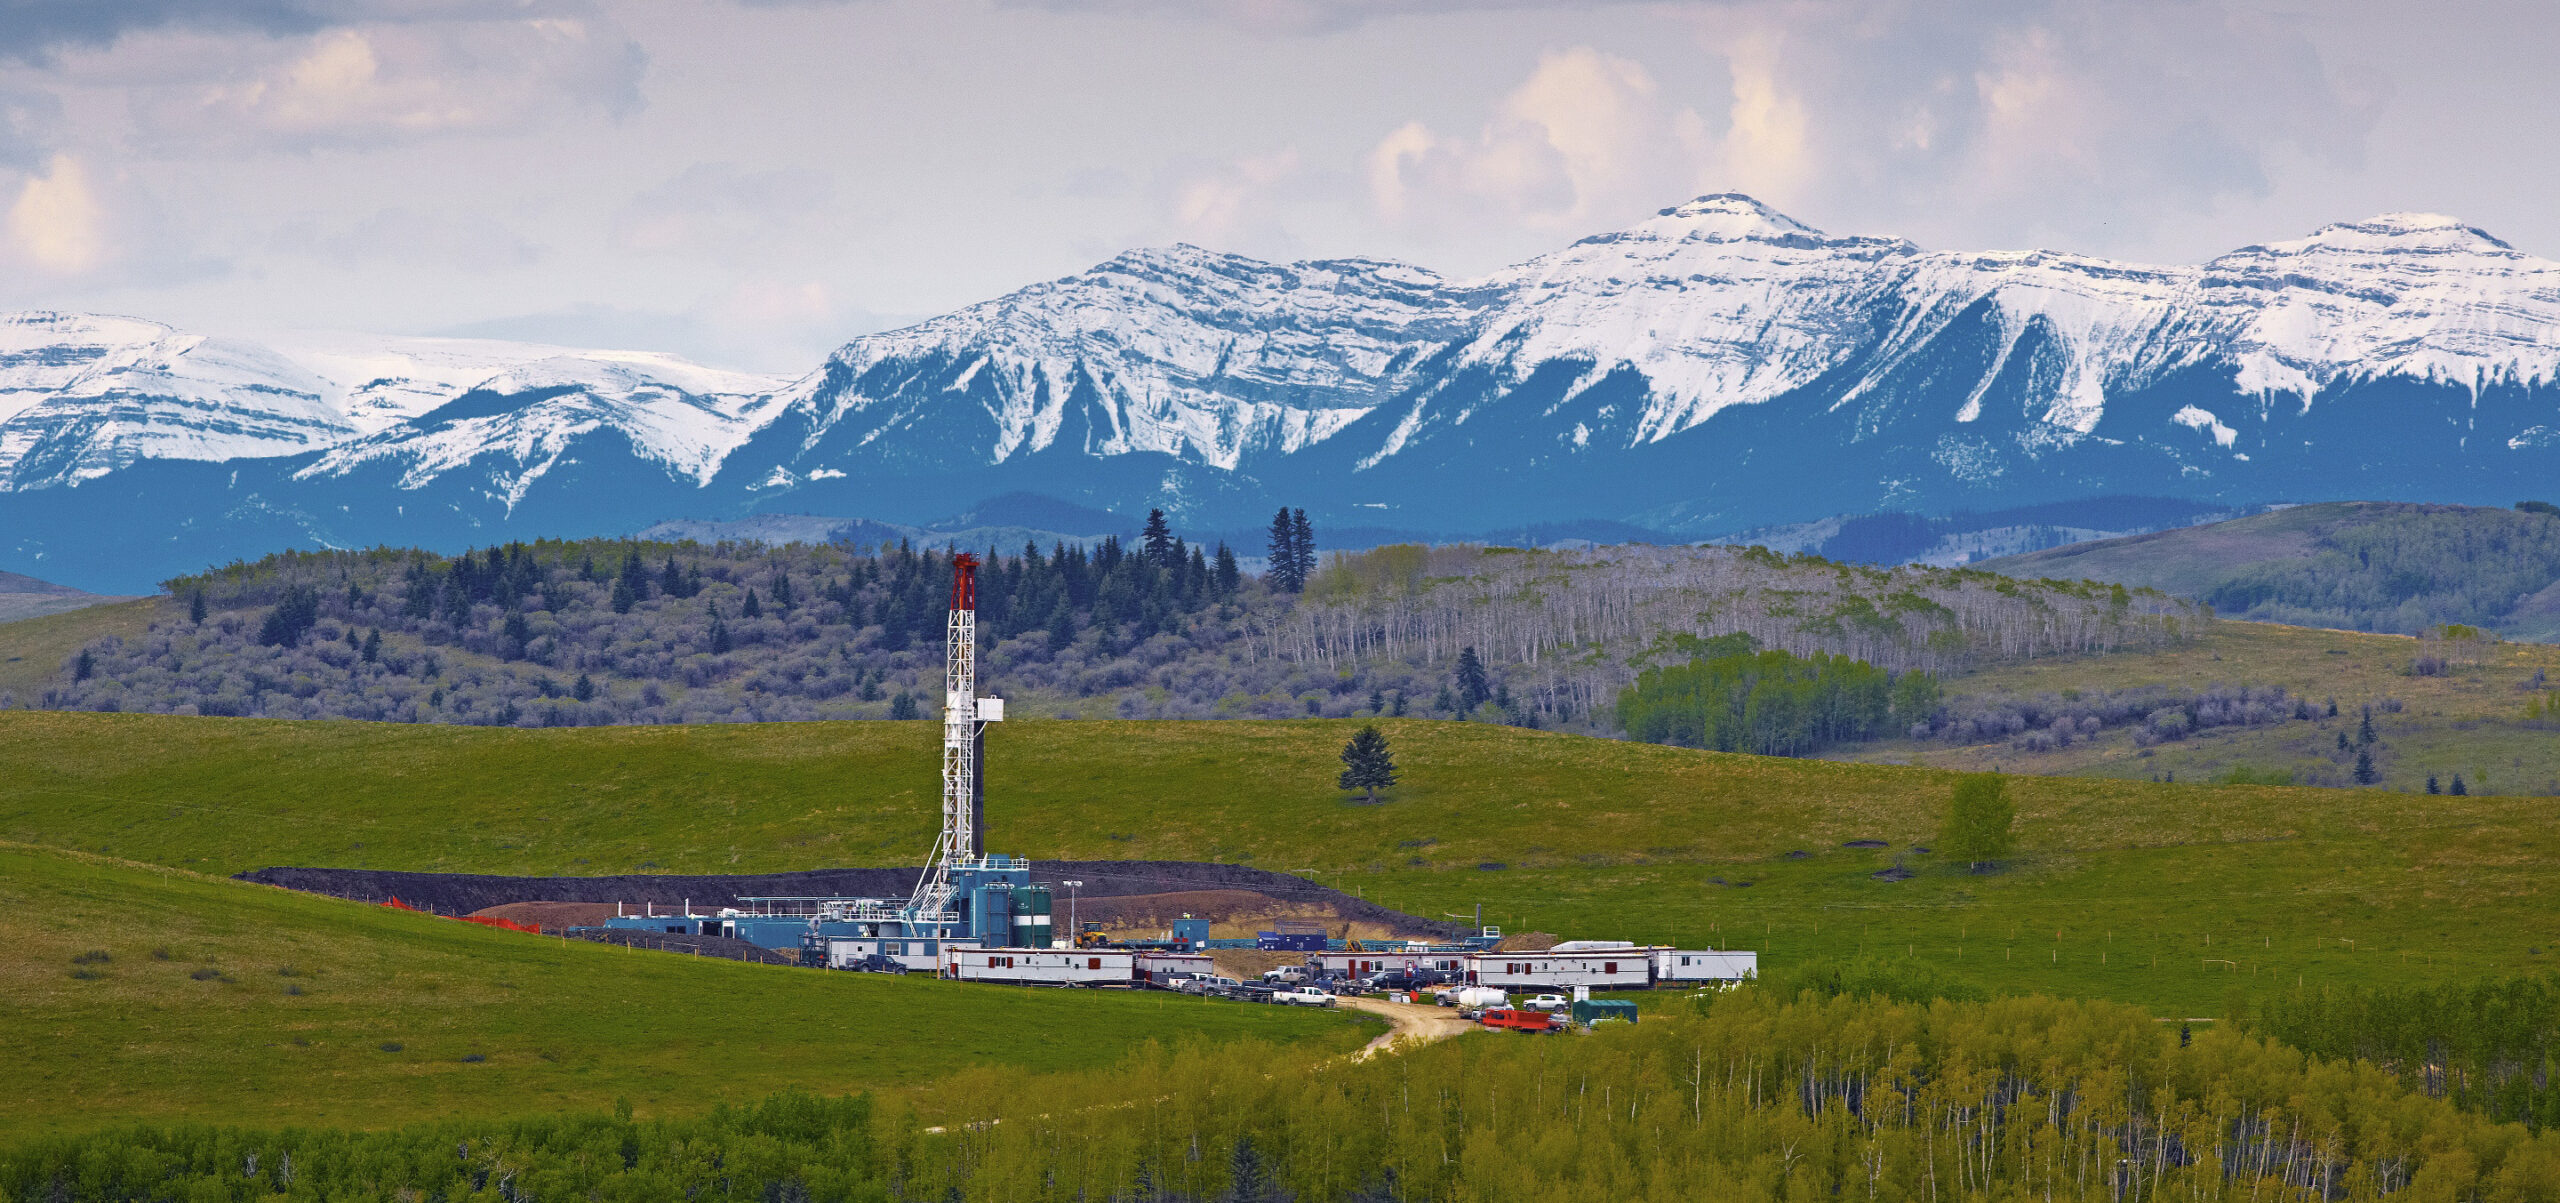 Photo of an oil rig in the foothills of southern Alberta with mountain peaks in the background
